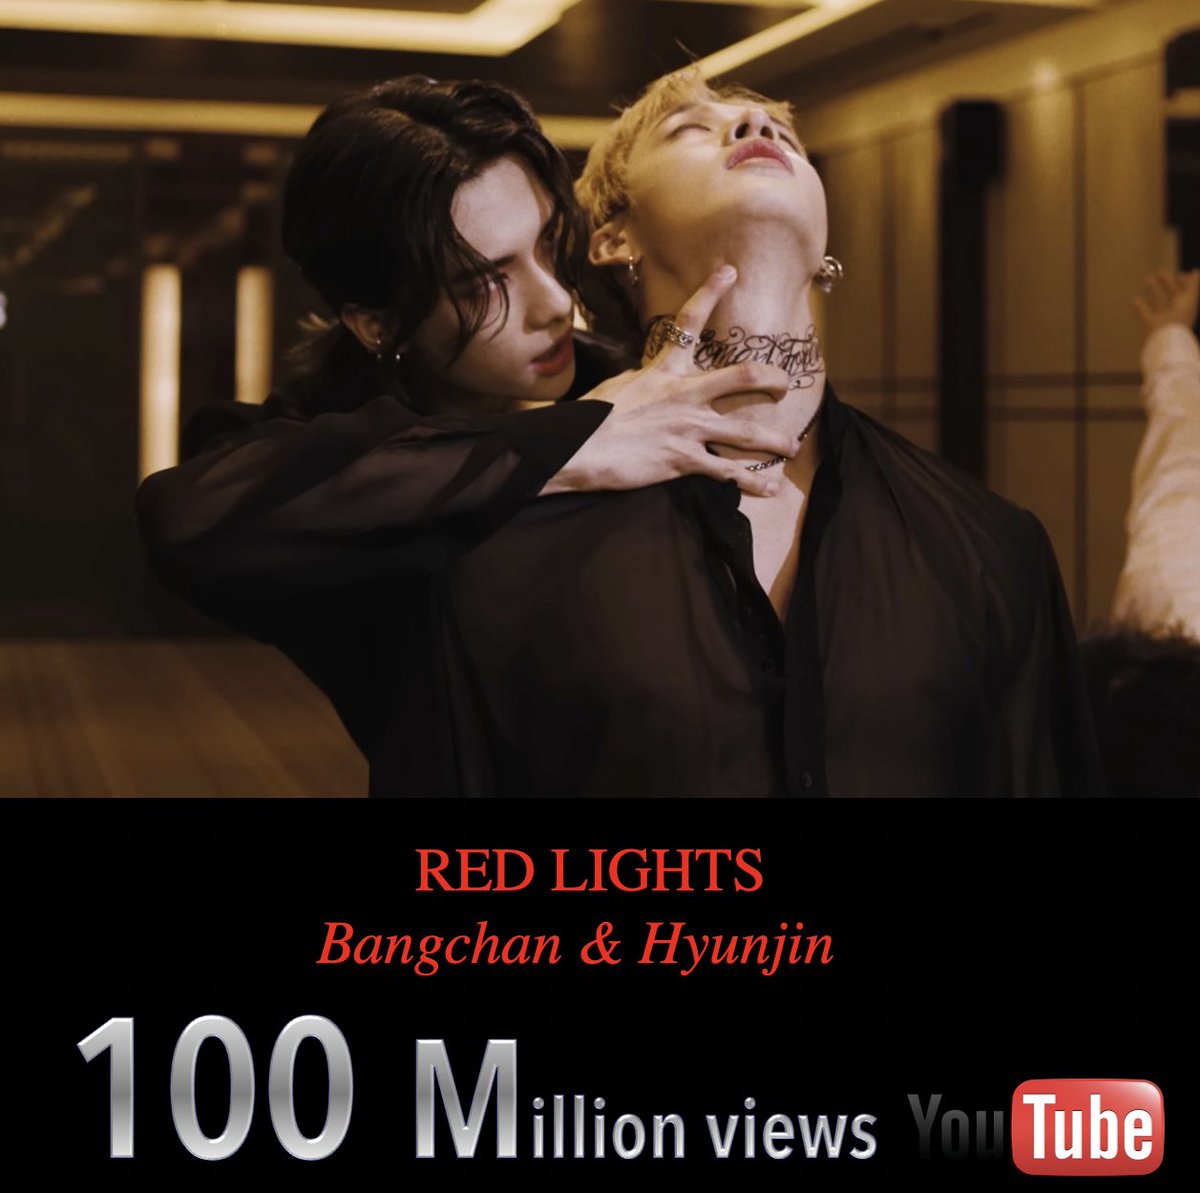 #StrayKids’ #Bangchan and #Hyunjin’s #RedLights, a B-side off their 2021 studio album #NOEASY, has surpassed 100 Million views on YouTube and 3 Million likes! 💪🎥💥💯Ⓜ️👑👑❤️‍🔥
🎥:youtube.com/watch?v=k8Y6ZT…

#BangChan_Hyunjin_100M